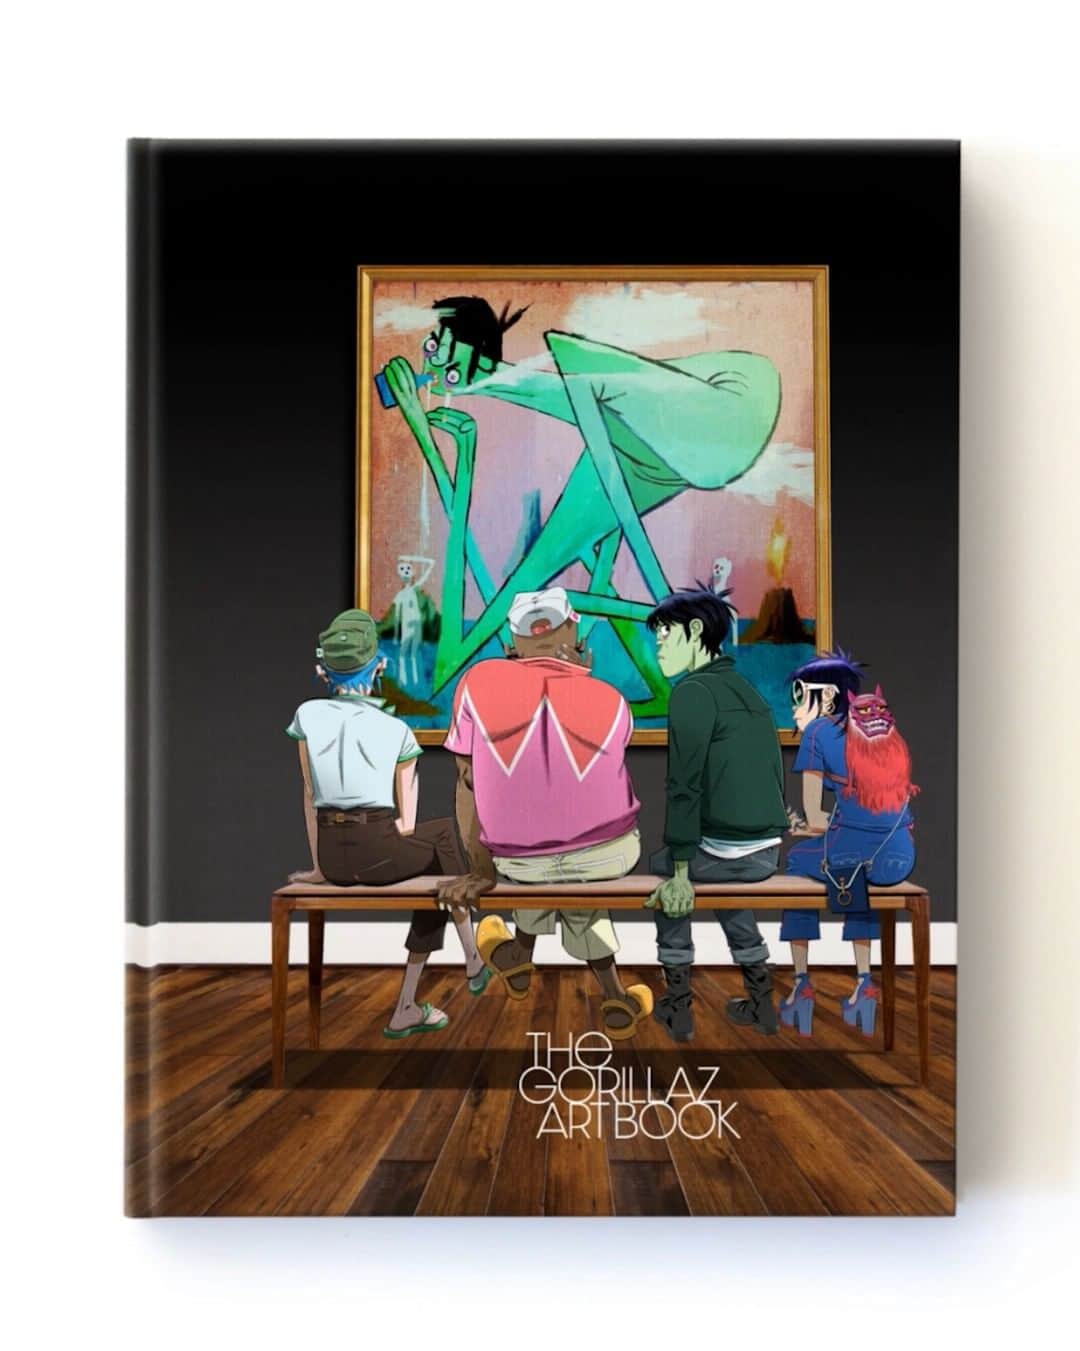 Gorillazのインスタグラム：「Due to global paper shortages the release date is now 17th June 2022. We have strived to produce the best quality book as far as paper, binding and finish is concerned, therefore compromise was not an option in order to meet the original date.  All orders placed before June 14 will be shipped immediately, and will arrive to you as per your chosen method of delivery.  If you have any queries regarding your order, please contact your point of sale. We appreciate your patience, and look forward to sharing this spectacular book with you.  🙏」